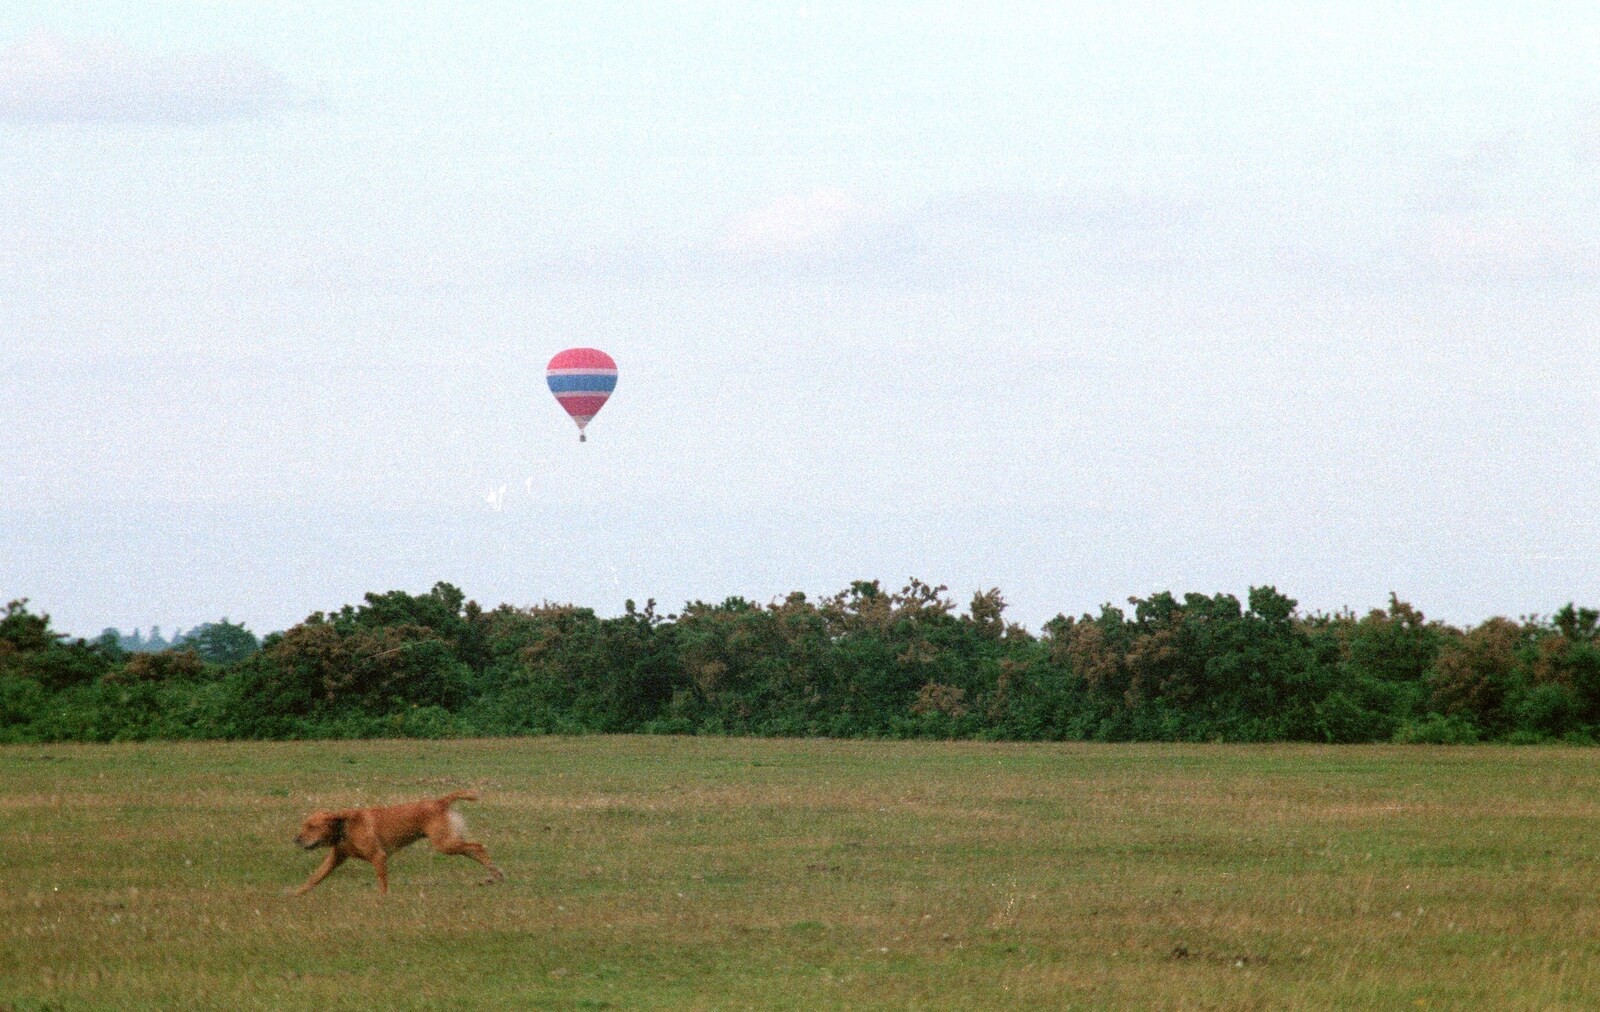 Geordie runs around on Wilverley Plain from A Vineyard Miscellany, Bransgore and the New Forest - 18th July 1986